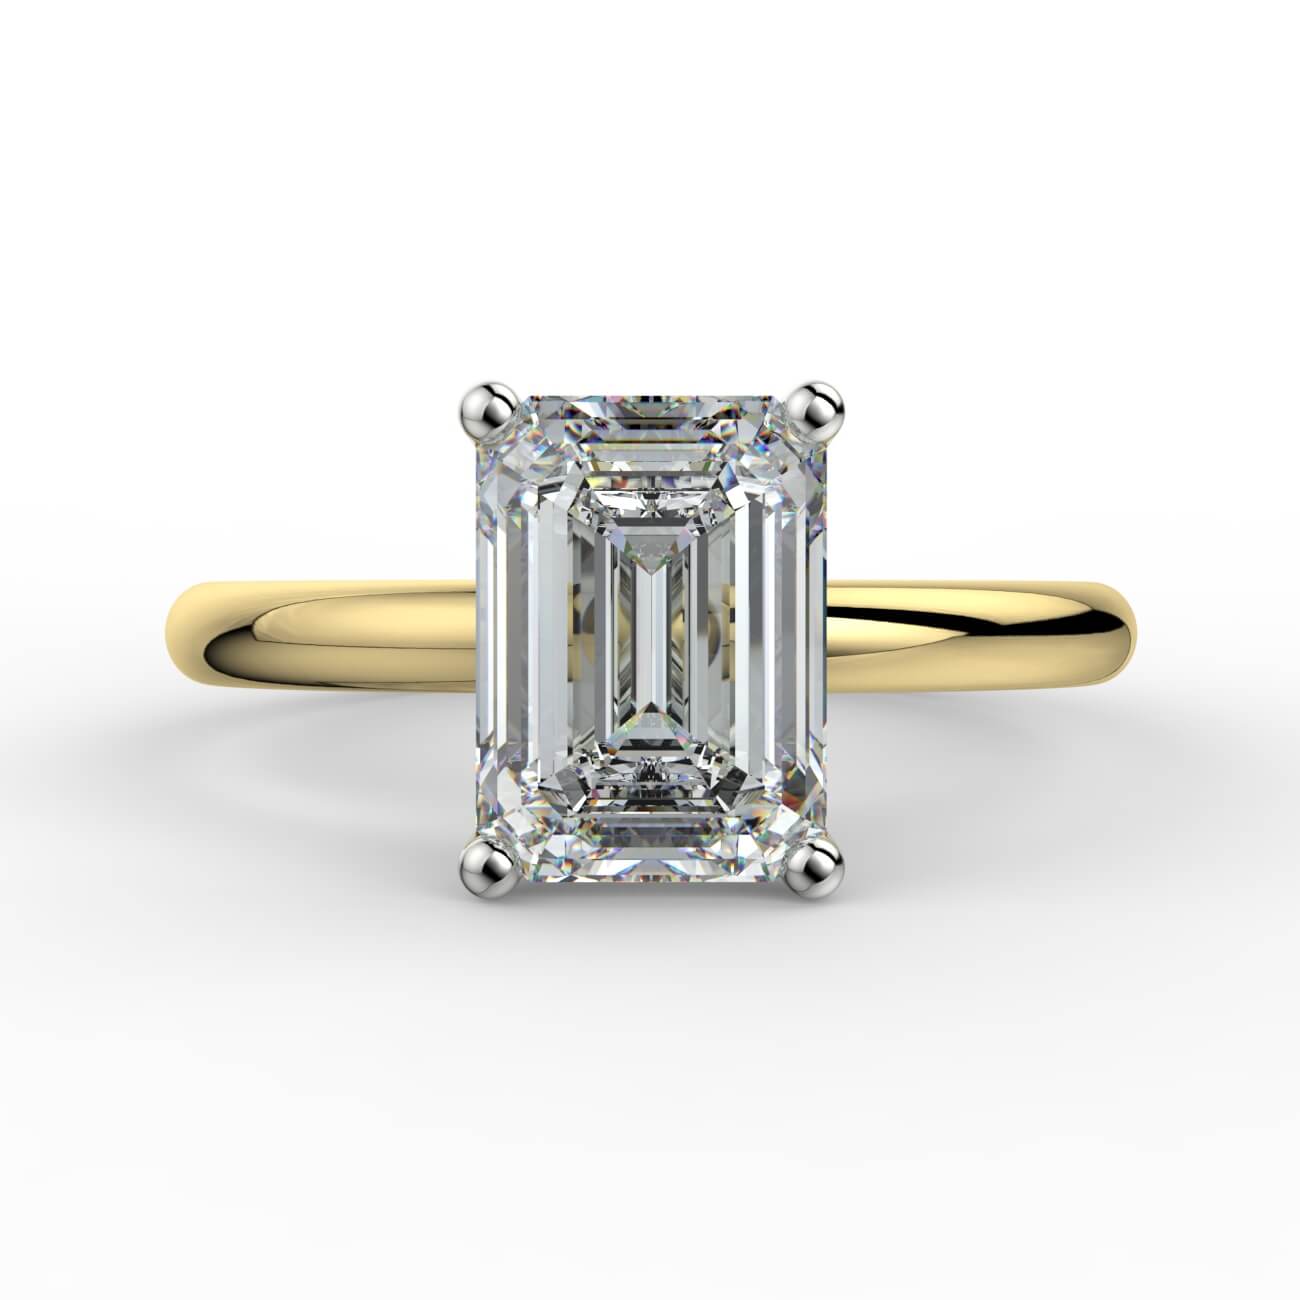 Comfort fit 4 claw emerald cut solitaire diamond ring in yellow and white gold – Australian Diamond Network